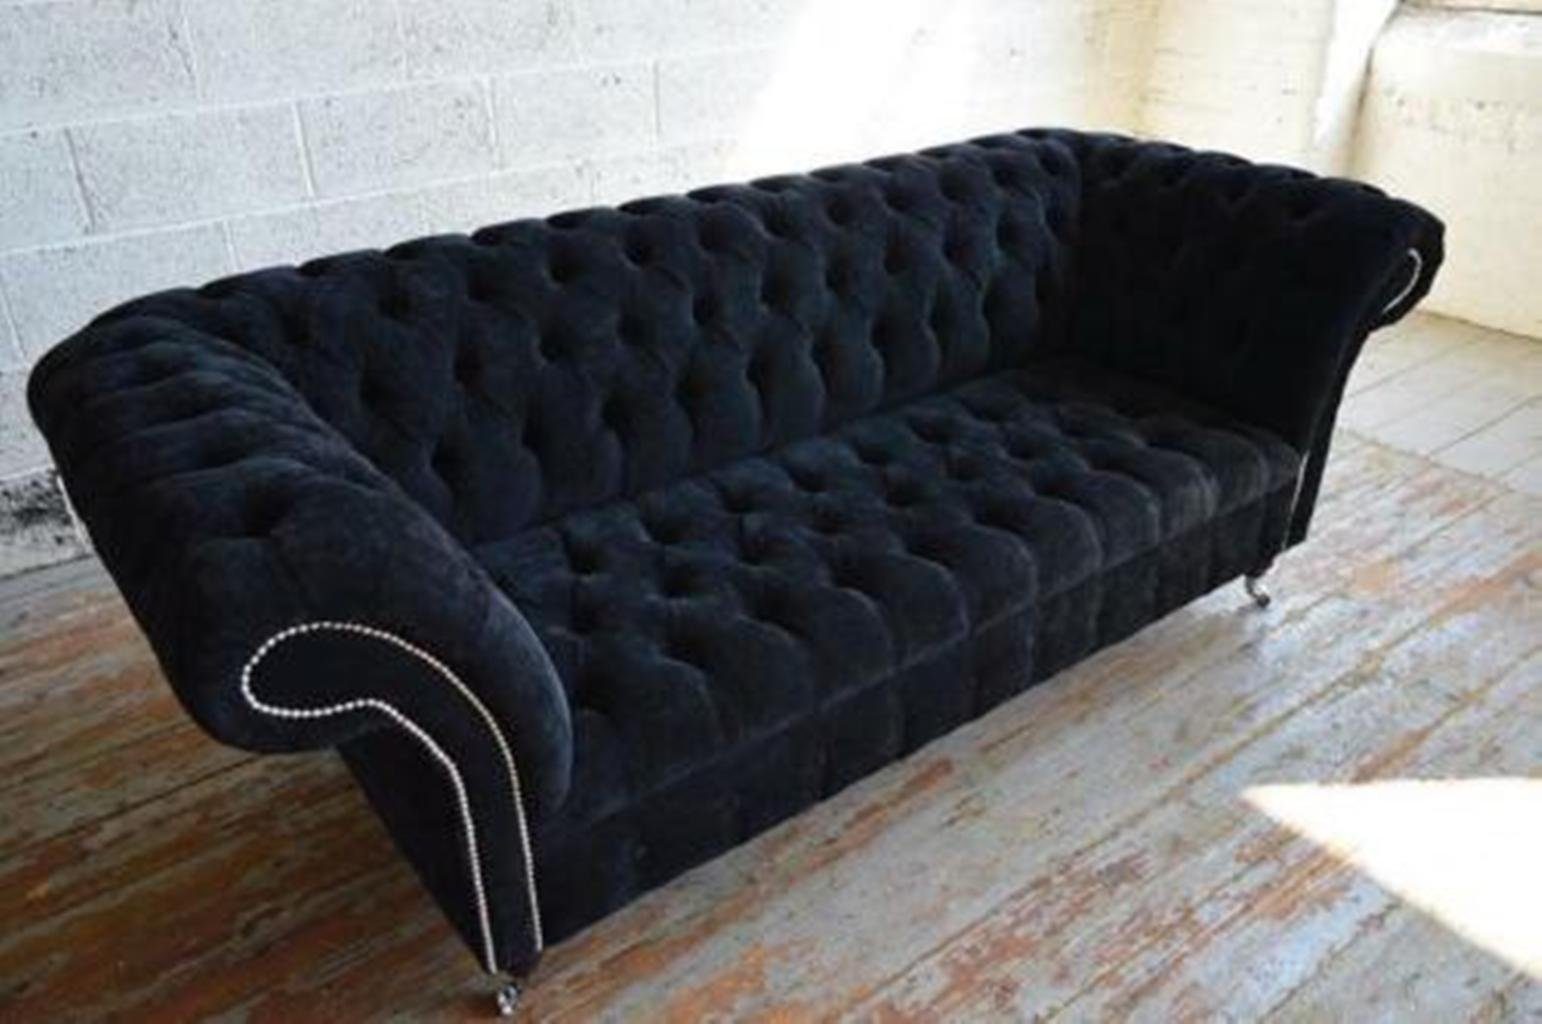 Design Couch Textil 3 Chesterfield-Sofa, Sitzer JVmoebel Chesterfield Sofa